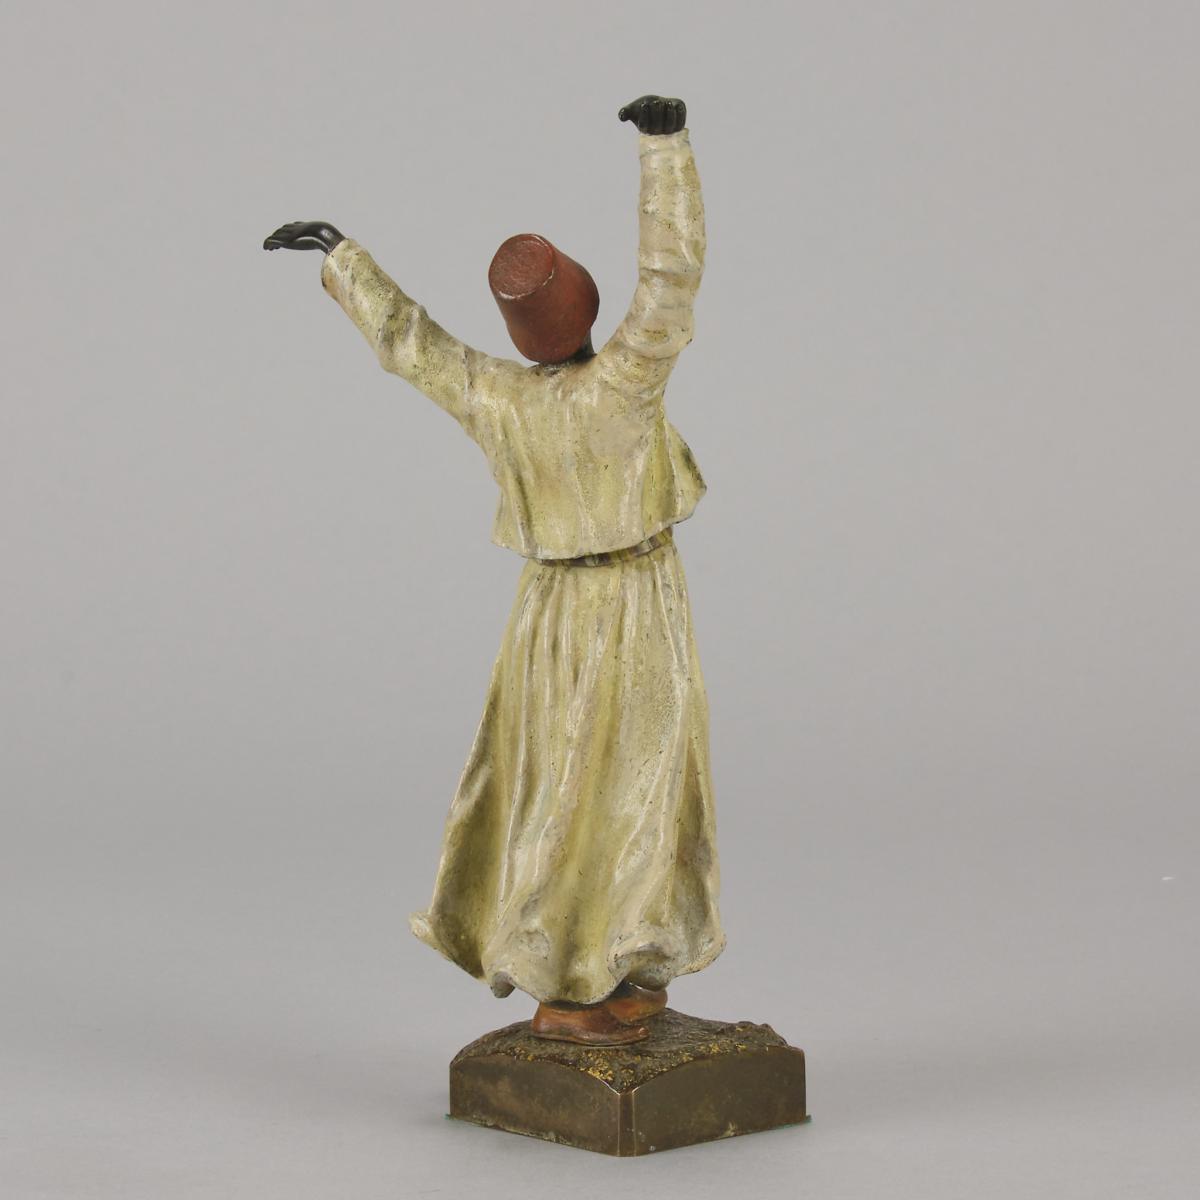 Early 20th Century Cold-Painted Orientalist Bronze Sculpture entitled "Whirling Dervish 2" by Franz Bergman